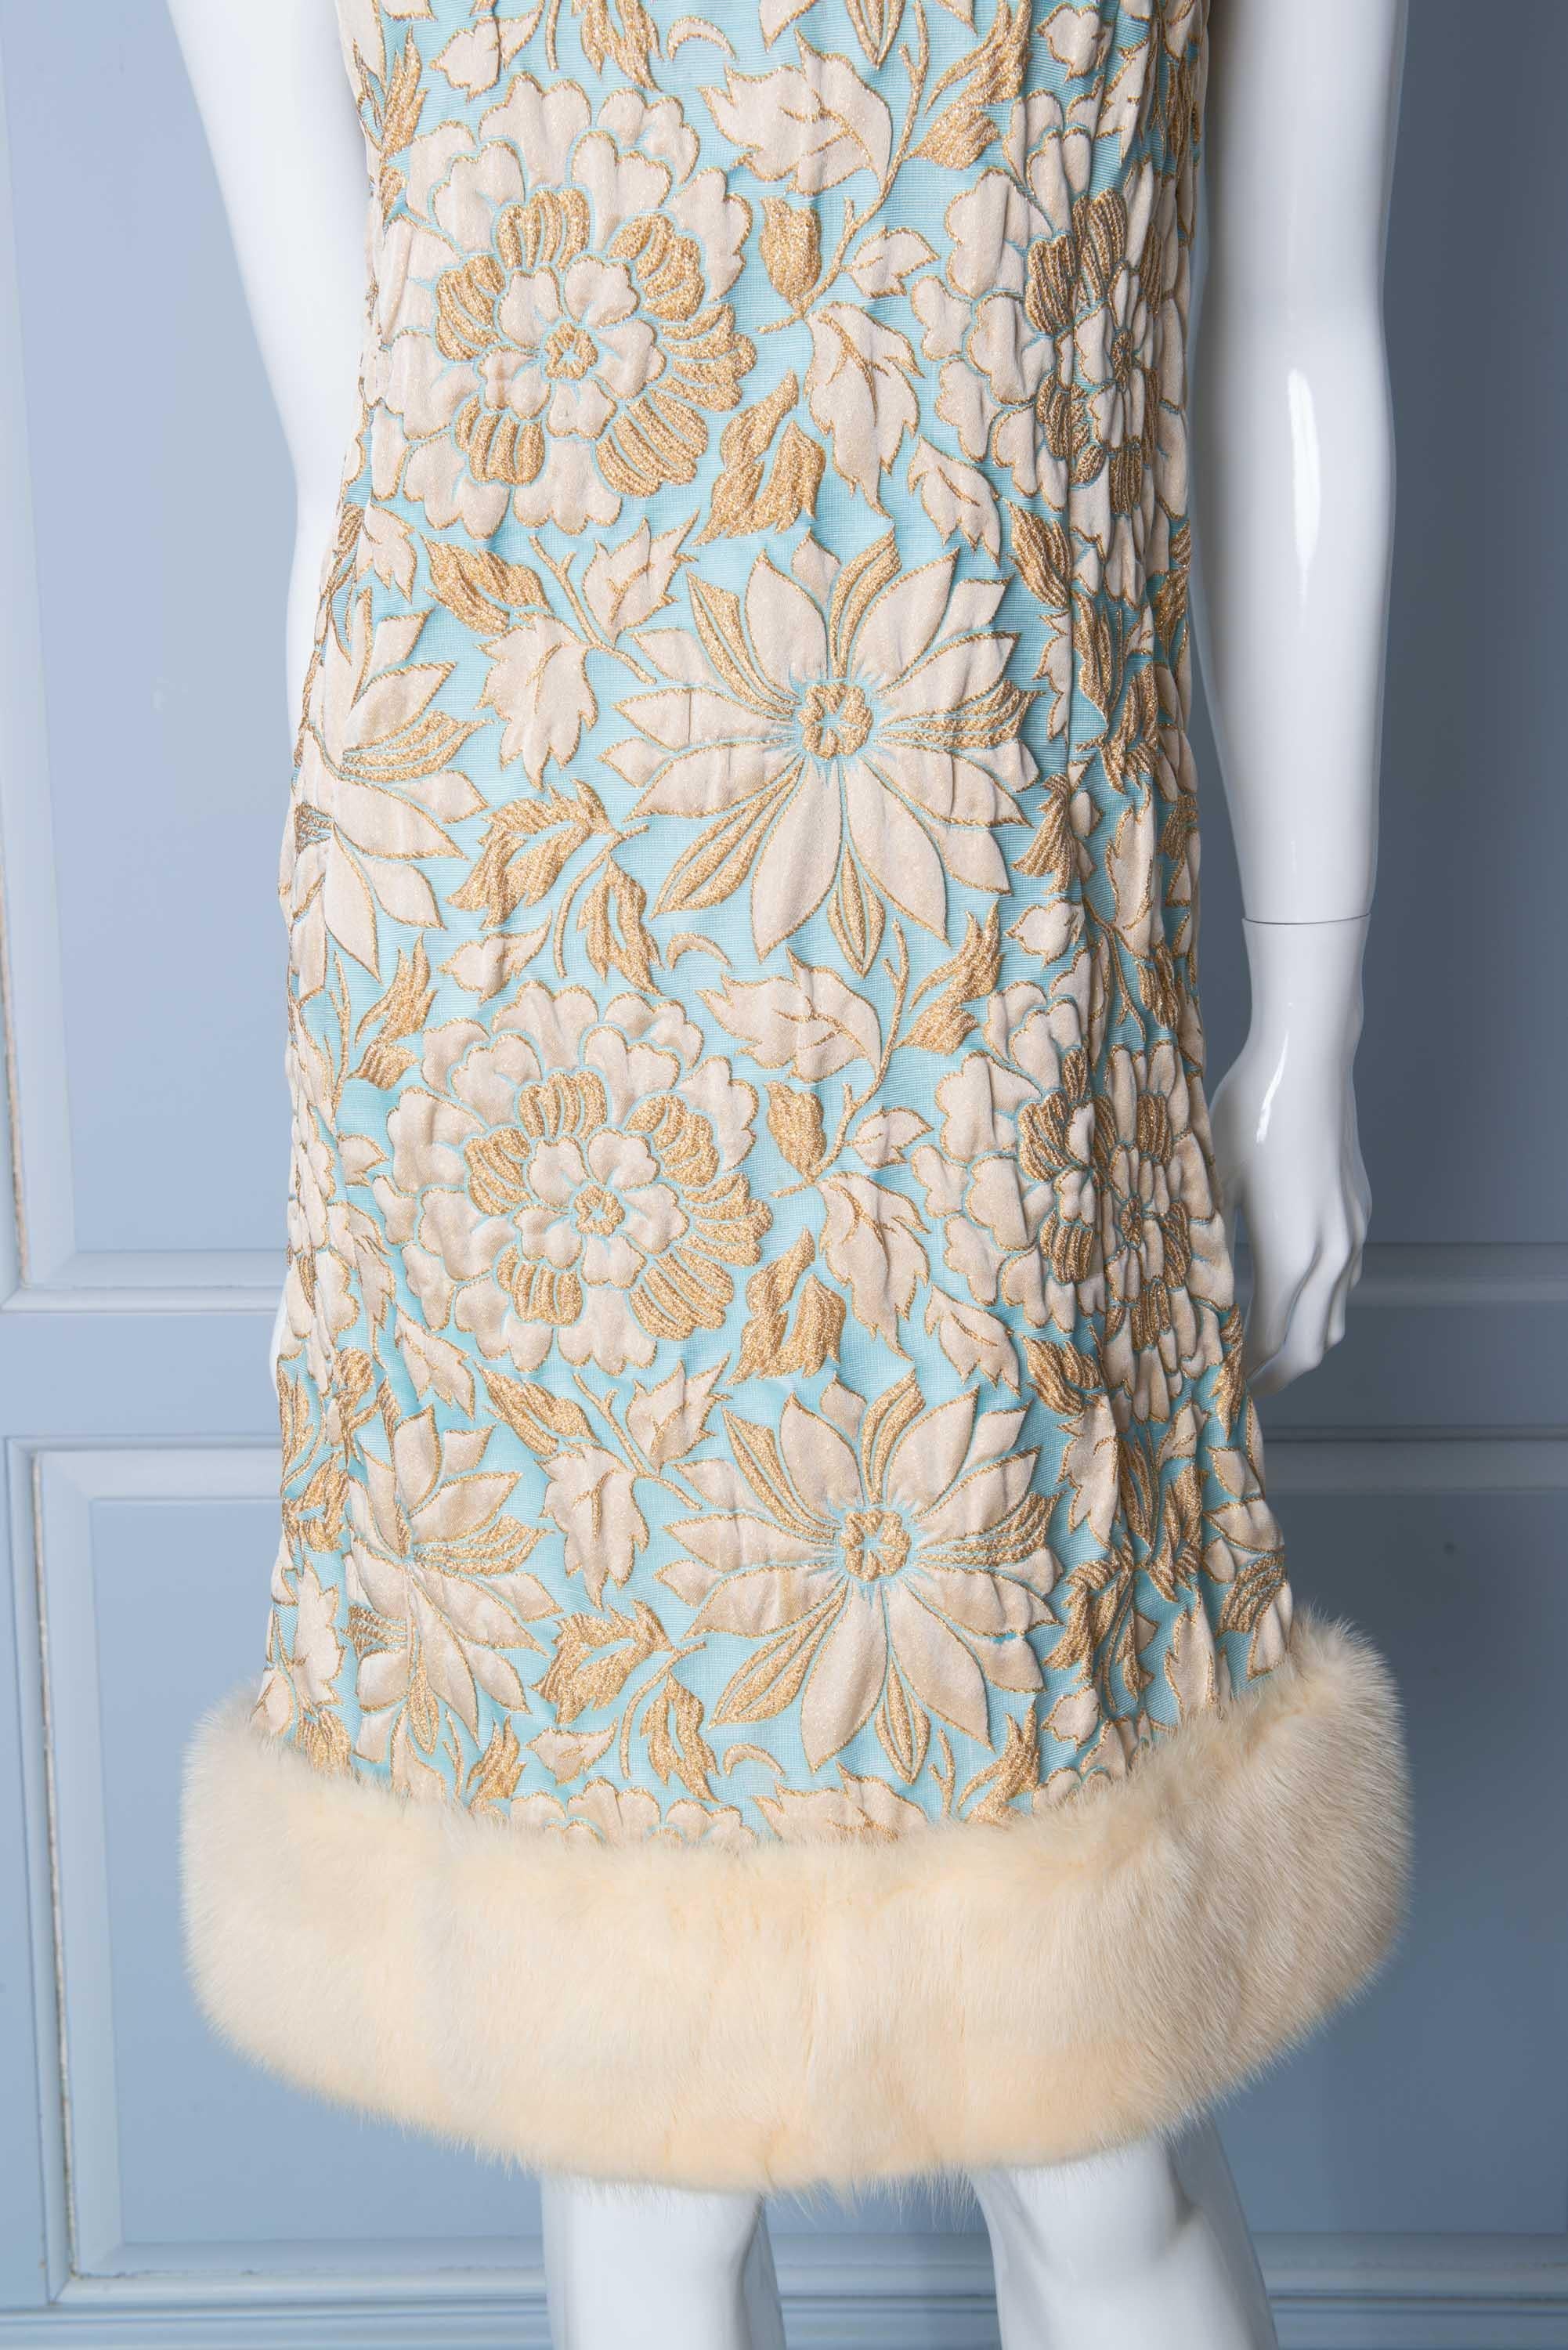 1960s Vintage Pale Blue and Gold Brocade, Mink Trimmed Coat and Dress im Zustand „Gut“ in Stamford, CT